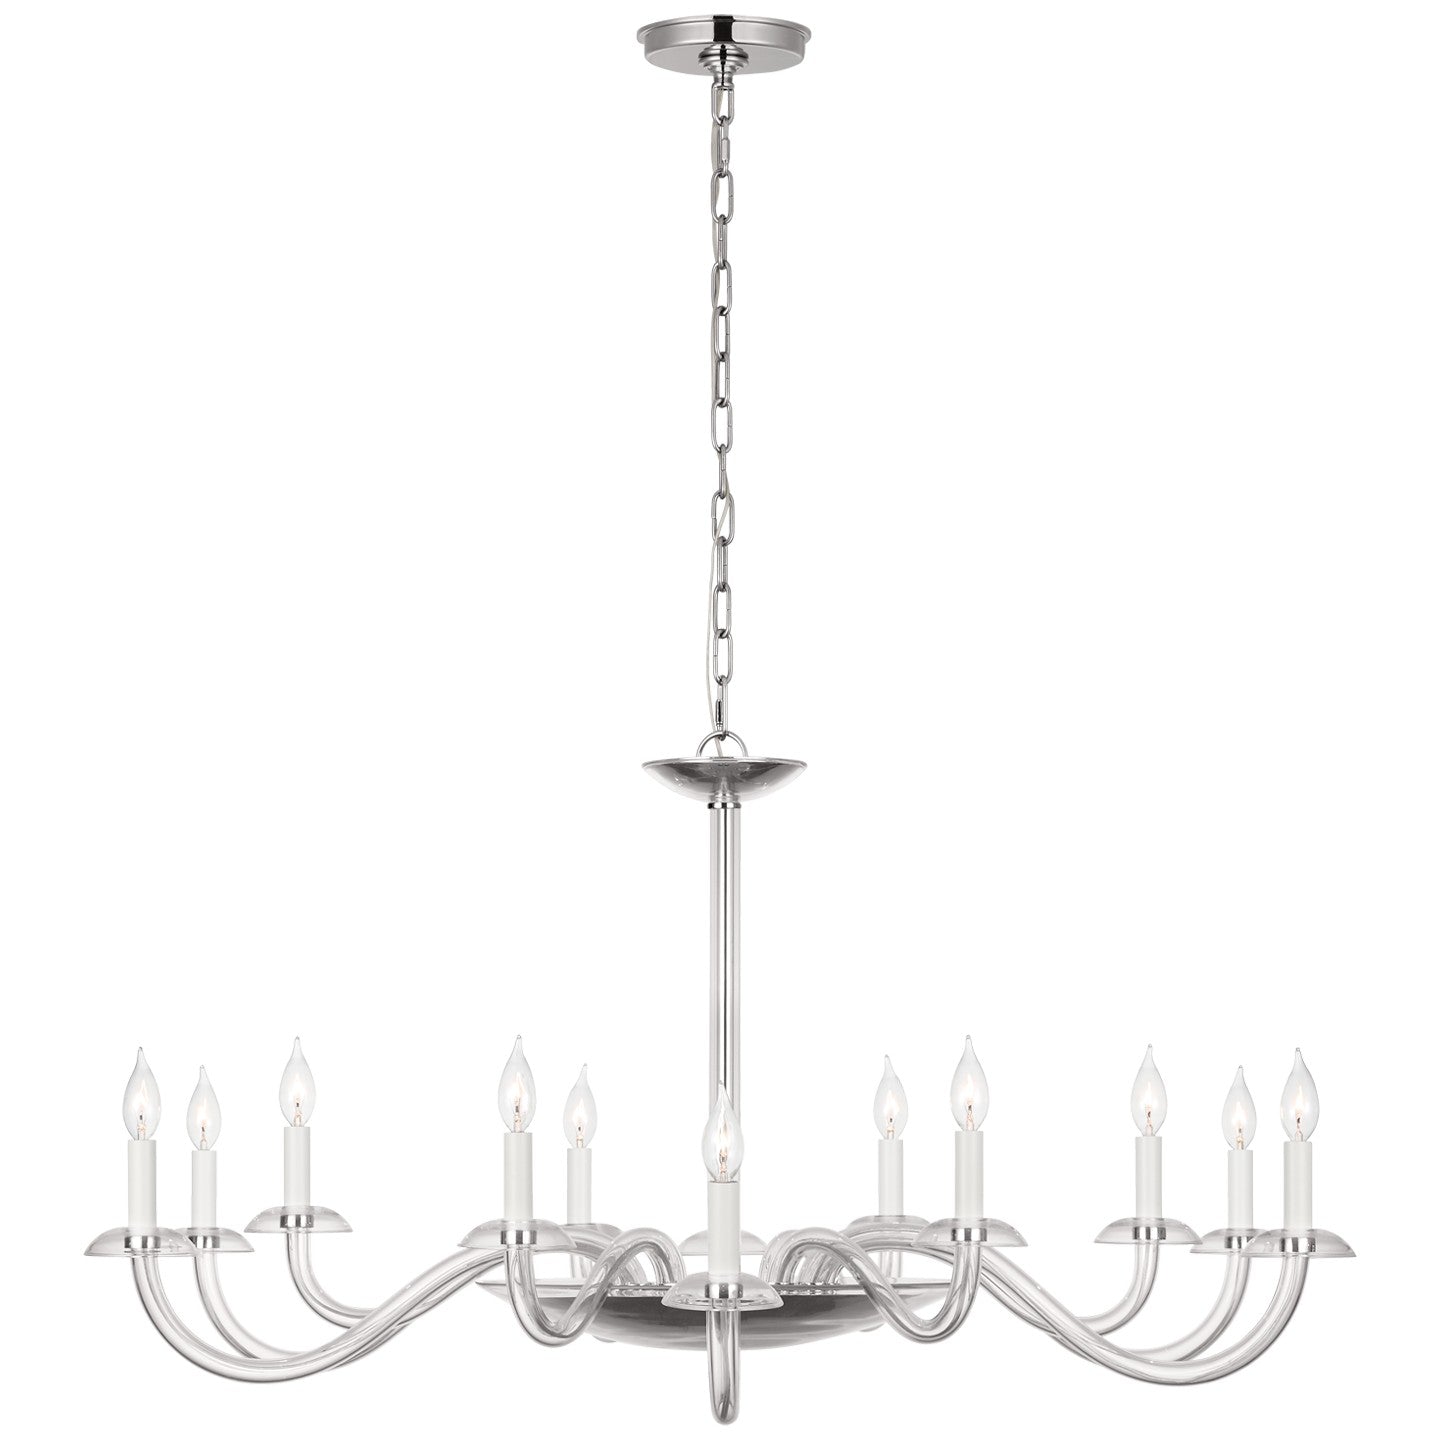 Visual Comfort Signature - PCD 5021CG/PN - LED Chandelier - Brigitte - Clear Glass and Polished Nickel